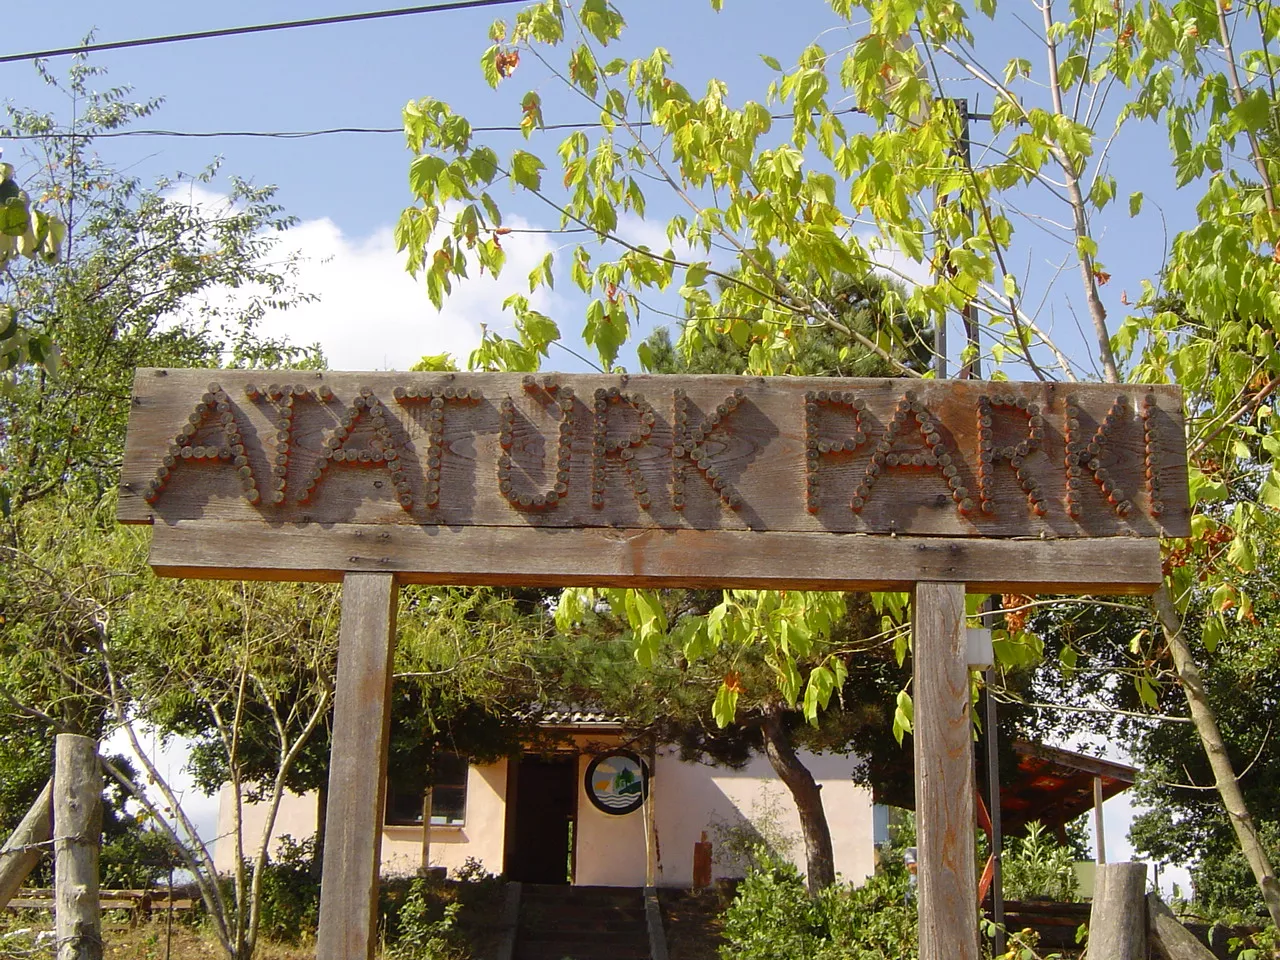 Ataturk Park in Turkey, Central Asia | Parks - Rated 3.7